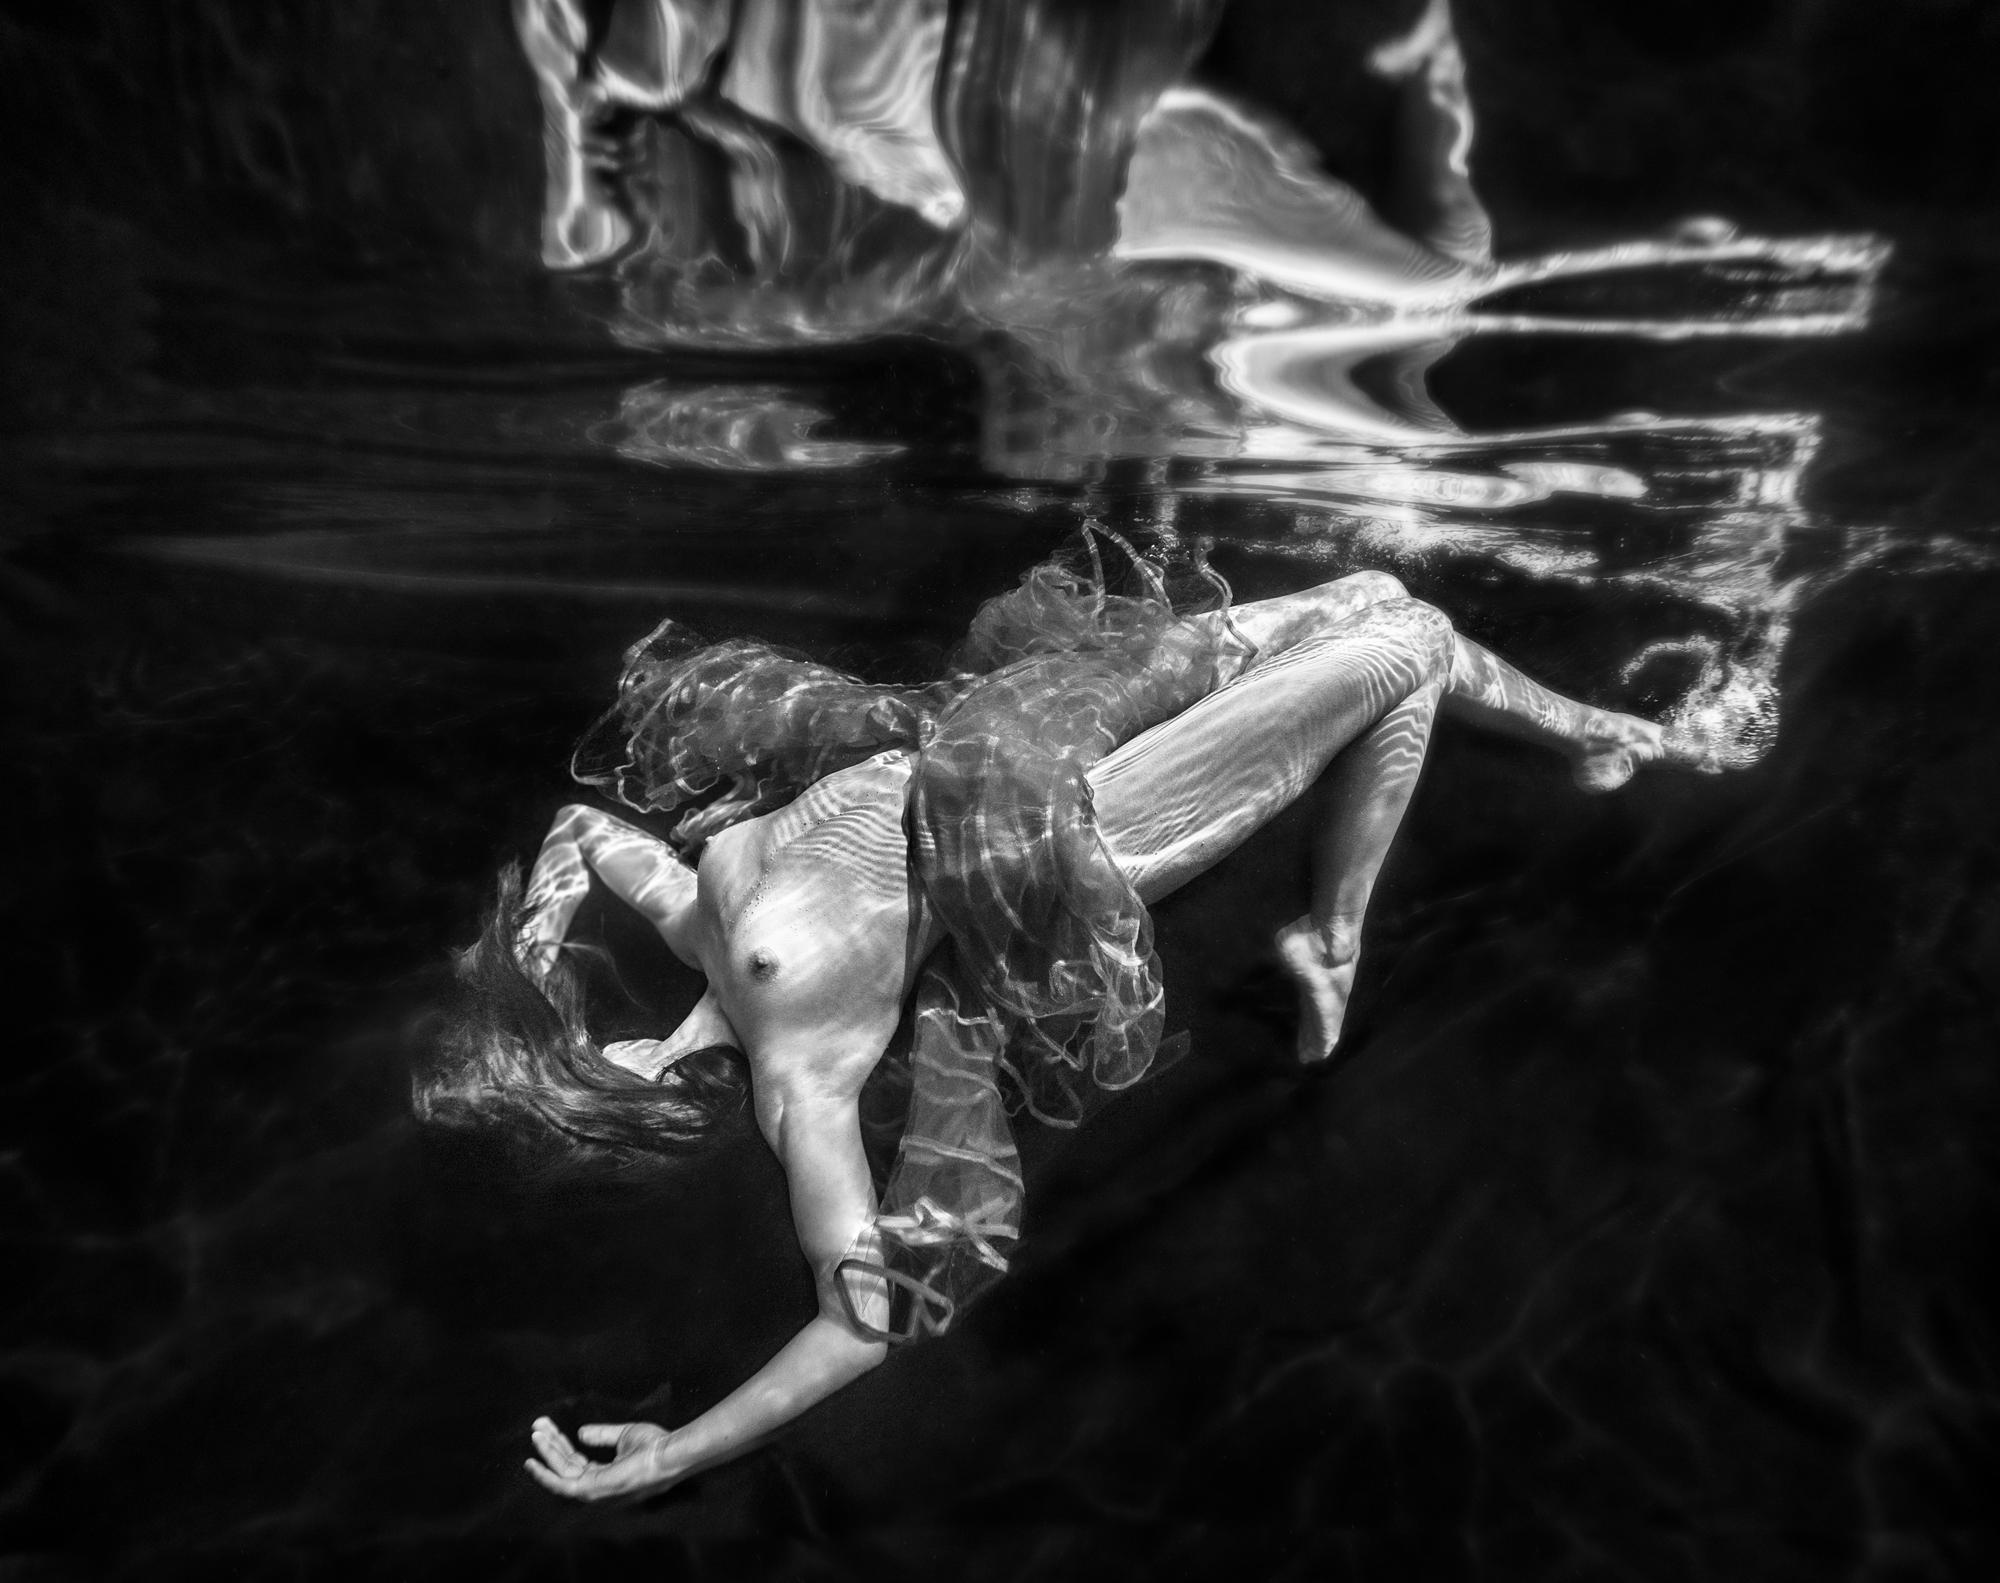 Infinity - underwater black and white nude photograph - archival paper 17"x22"